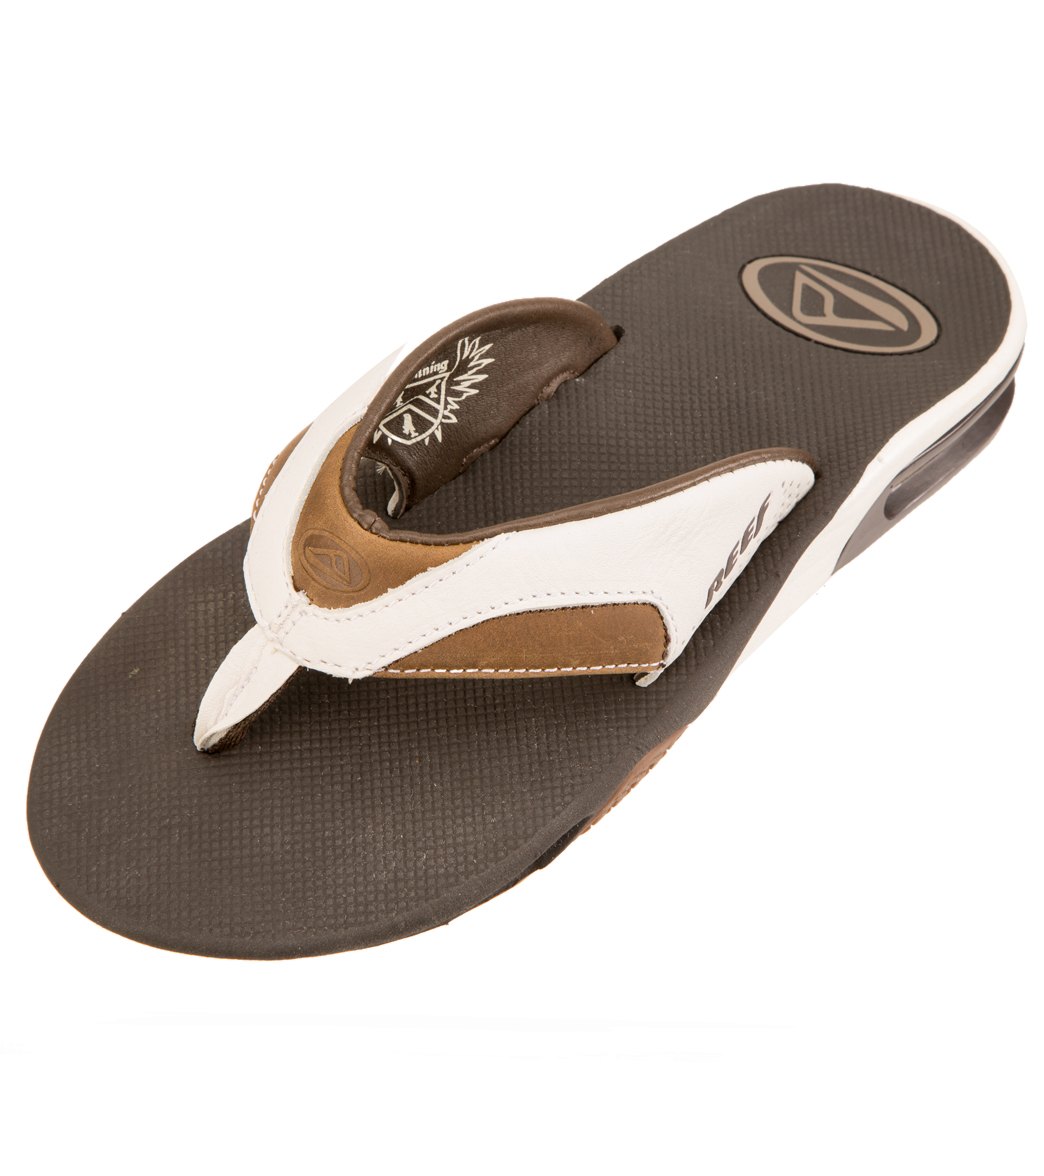 Reef Men's Leather Fanning Flip Flop - White/Brown 4 Leather/Rubber - Swimoutlet.com